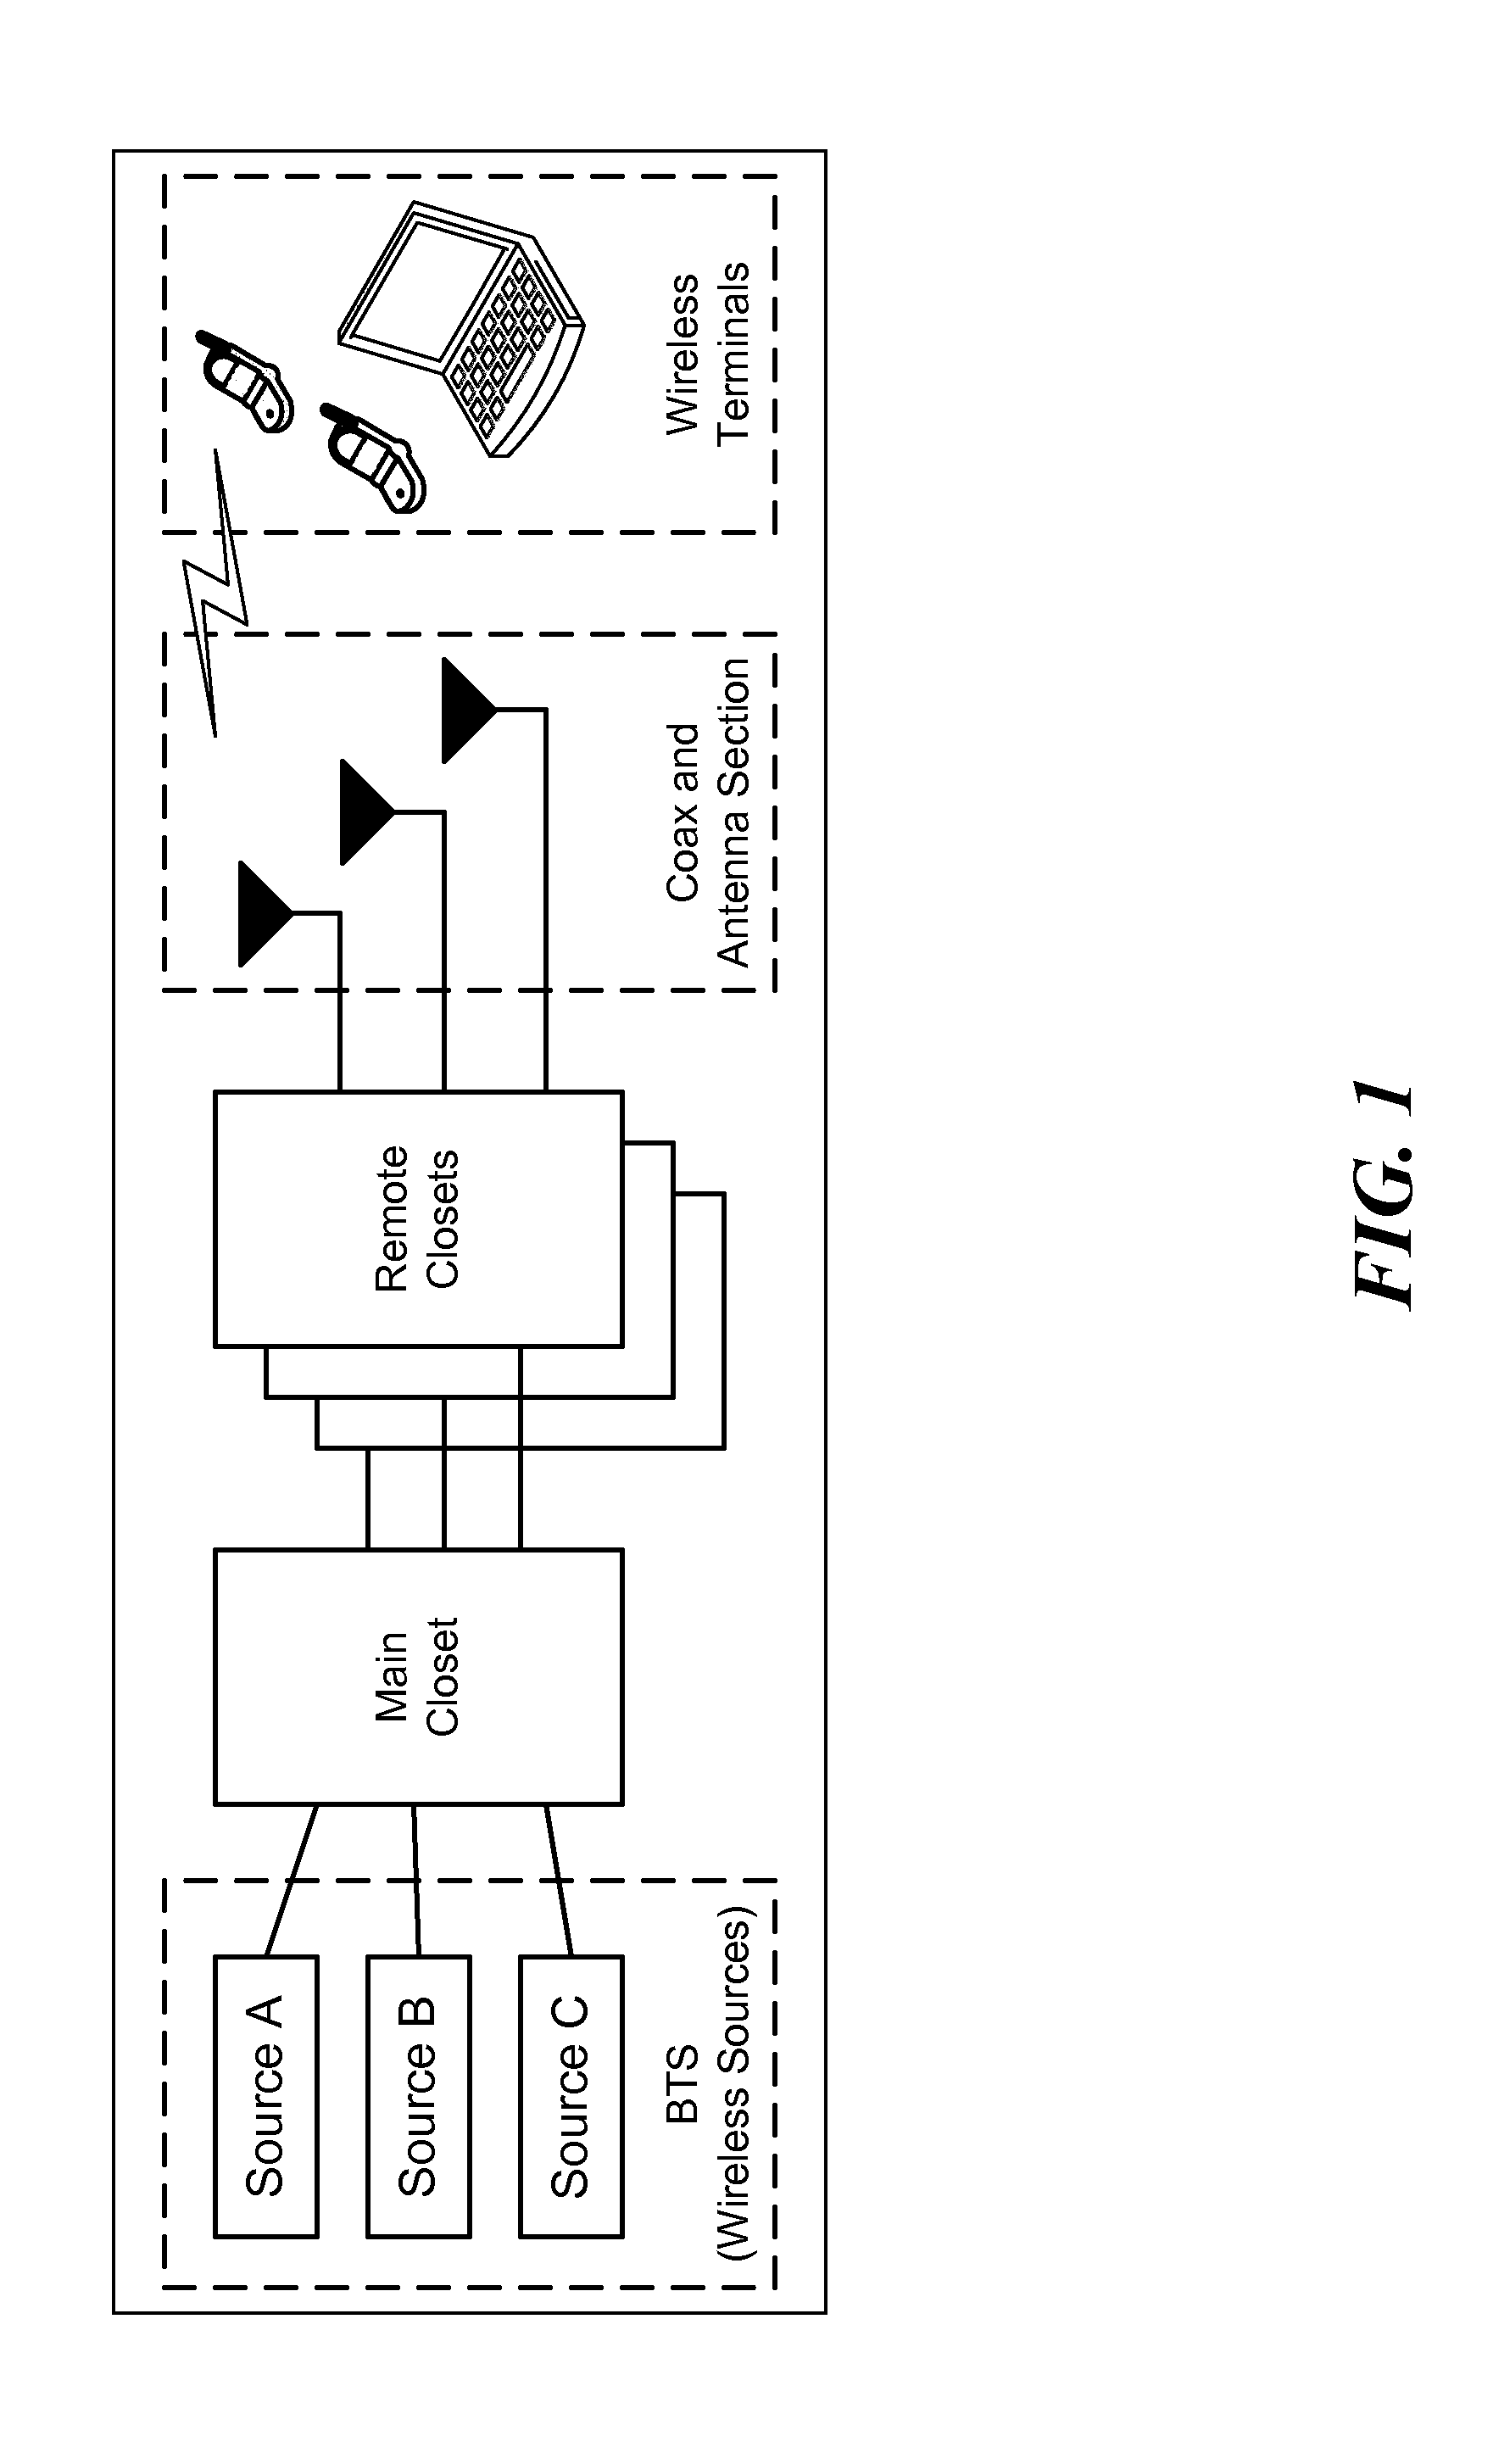 Multiple data services over a distributed antenna system